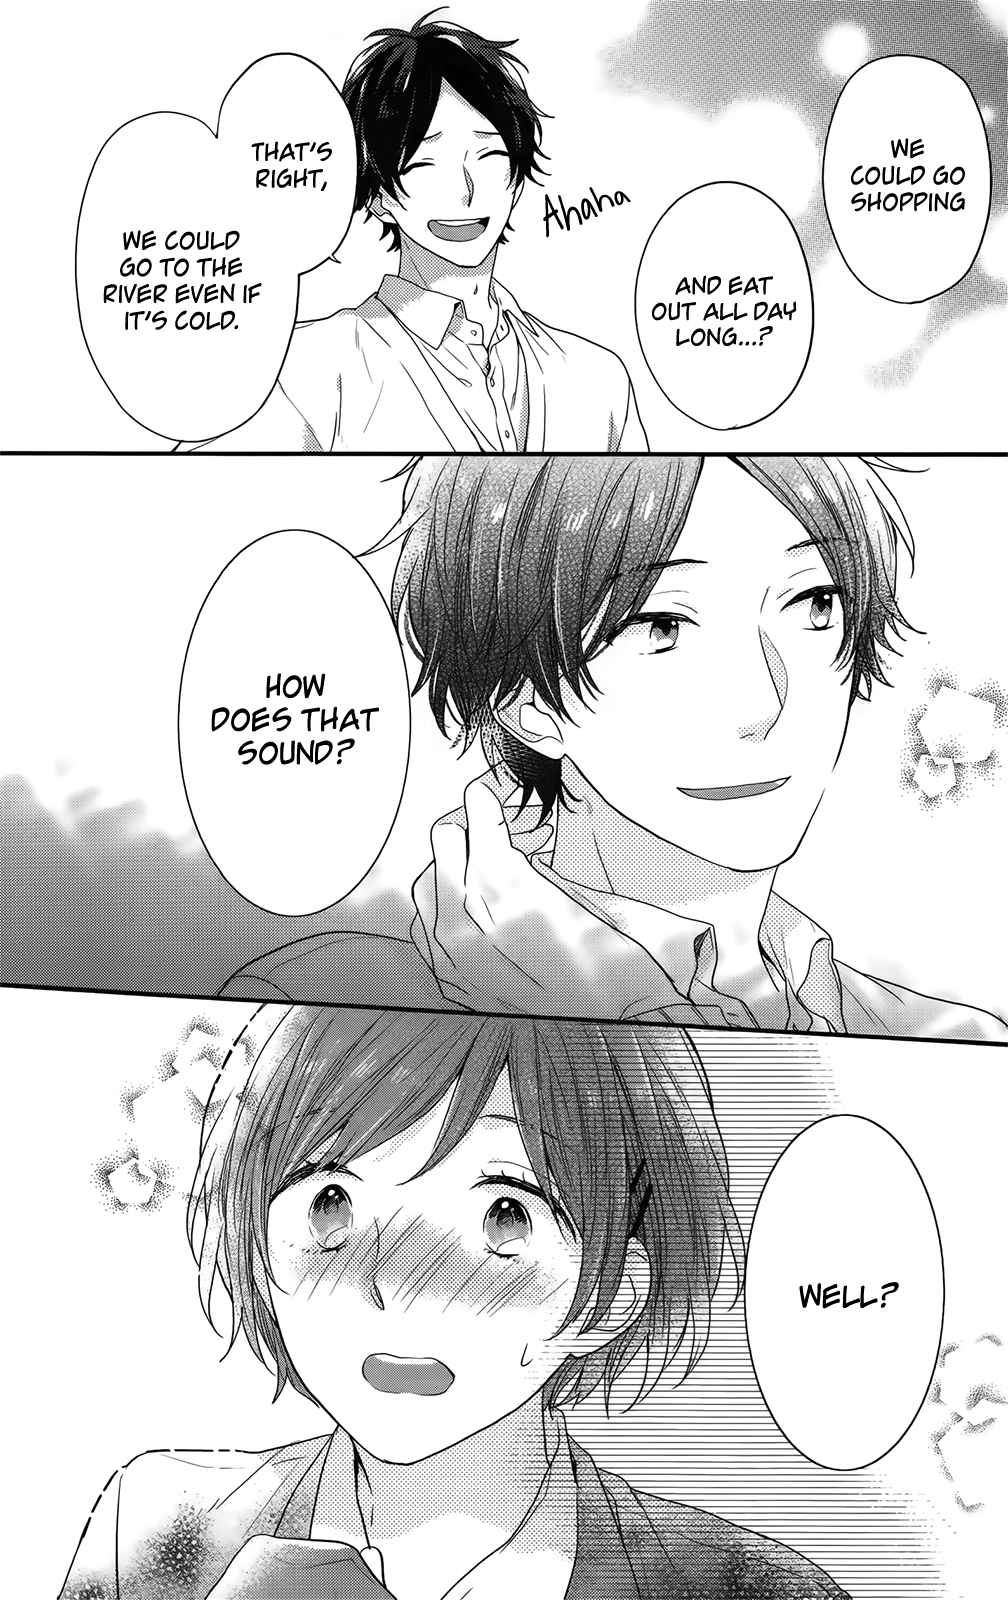 Nijiiro Days Vol. 15 Ch. 57 Taking Photos That Would Make You Cry Later